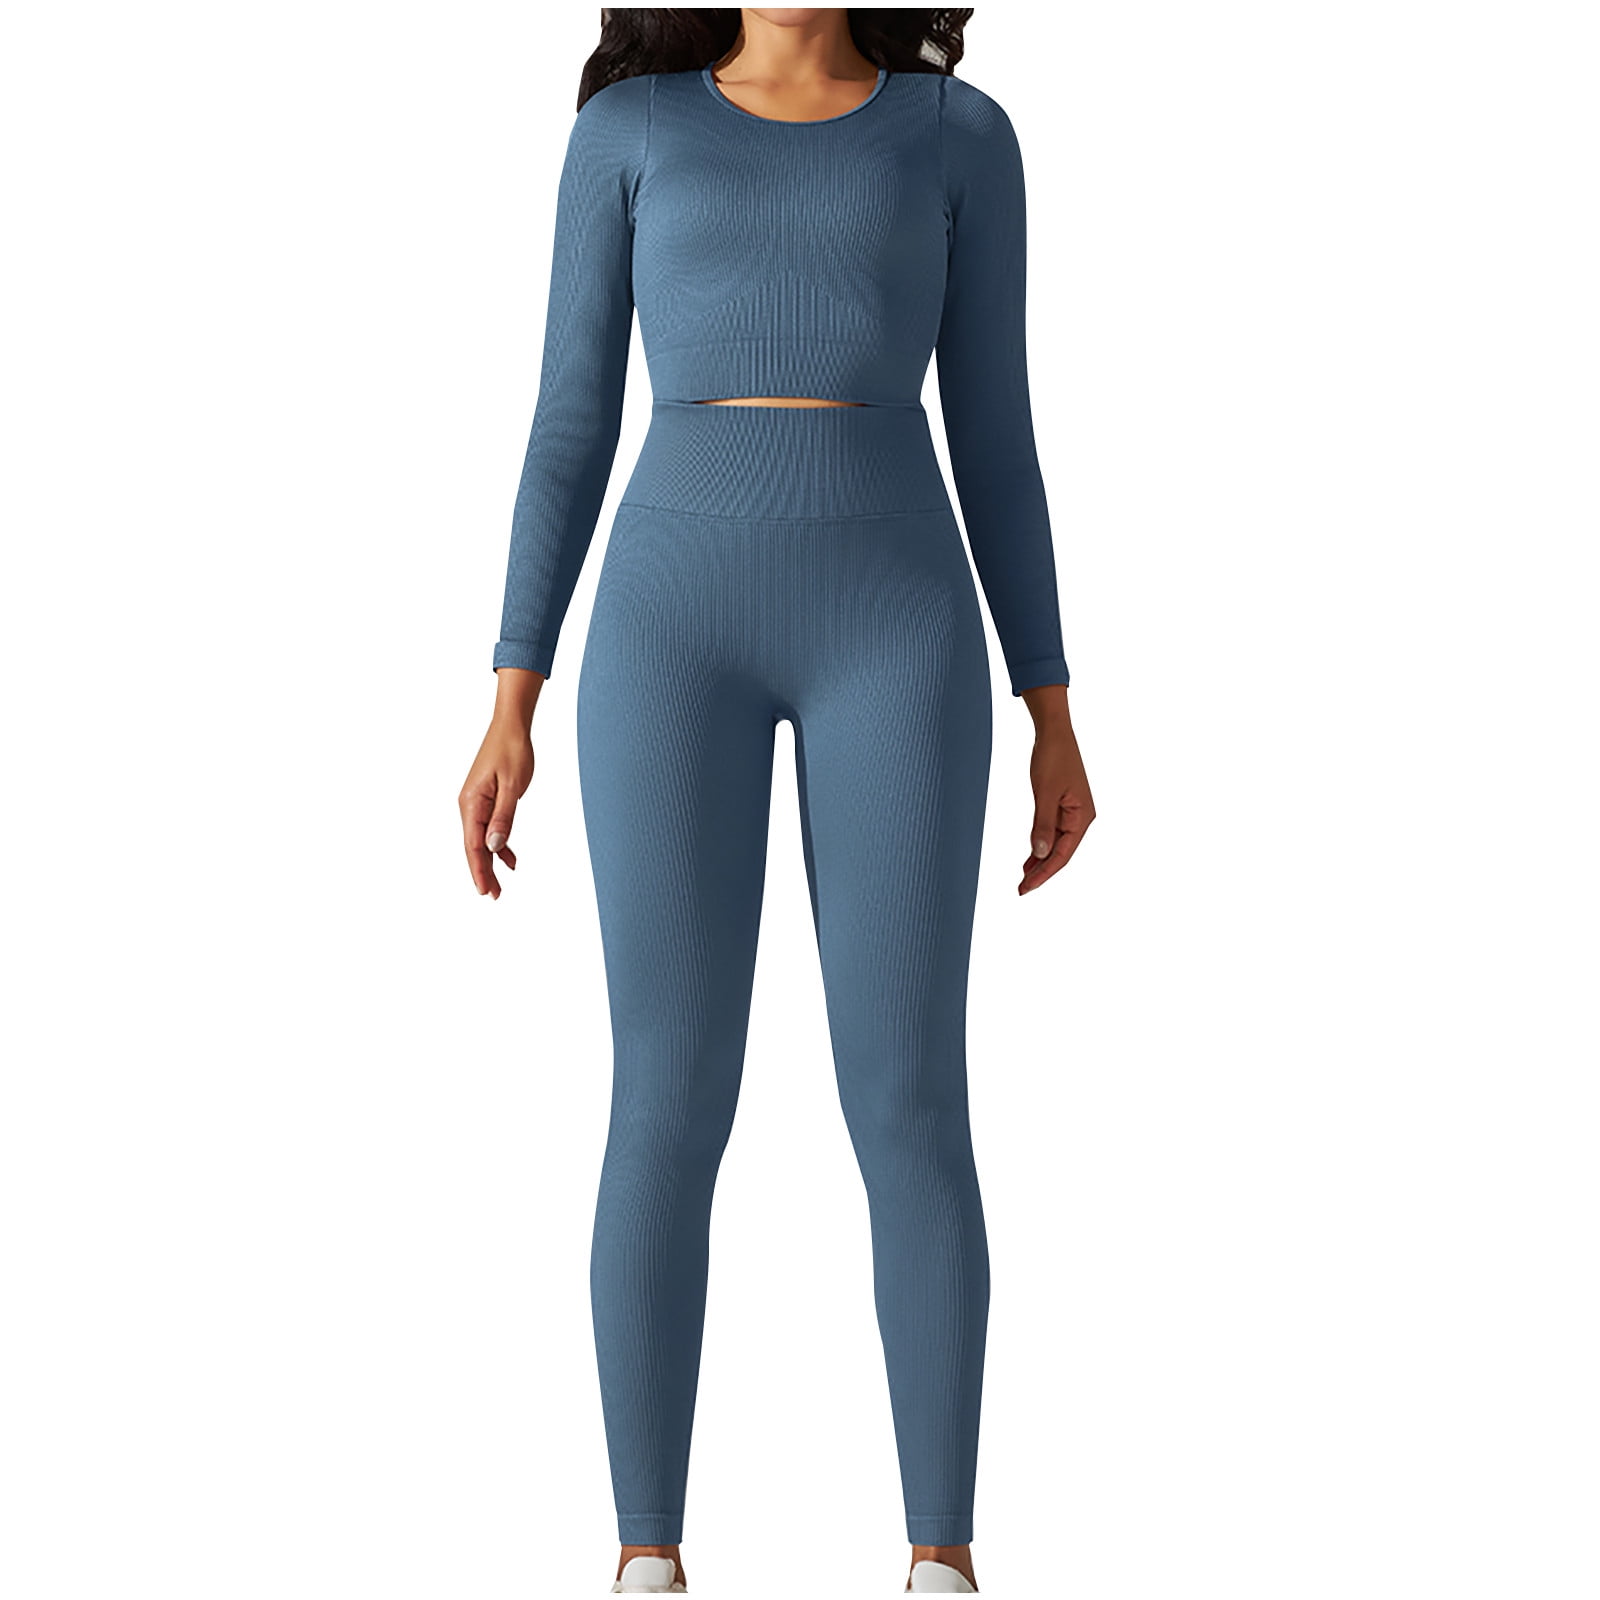 KEEPTO Workout Sets for Women Long Sleeve Zipper Crop Top with Tummy Control  High Waist Seamless Leggings Gym Outfits